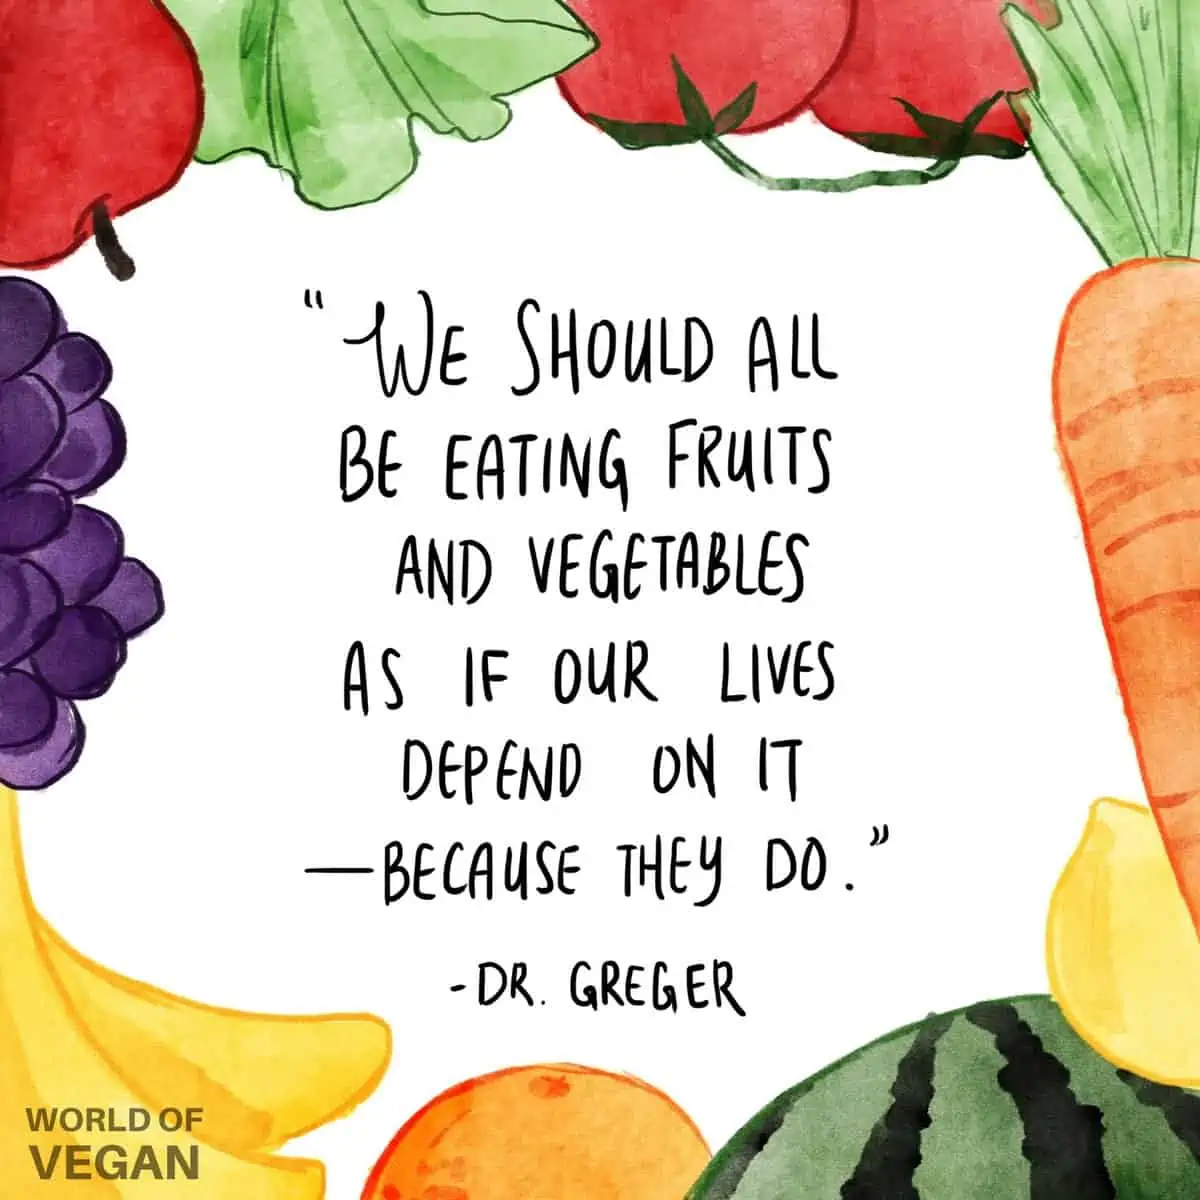 Vegan art with healthy plant-based foods surrounding a Dr. Greger quote that says "We should all be eating fruits and vegetables like our lives depend on it—because they do.